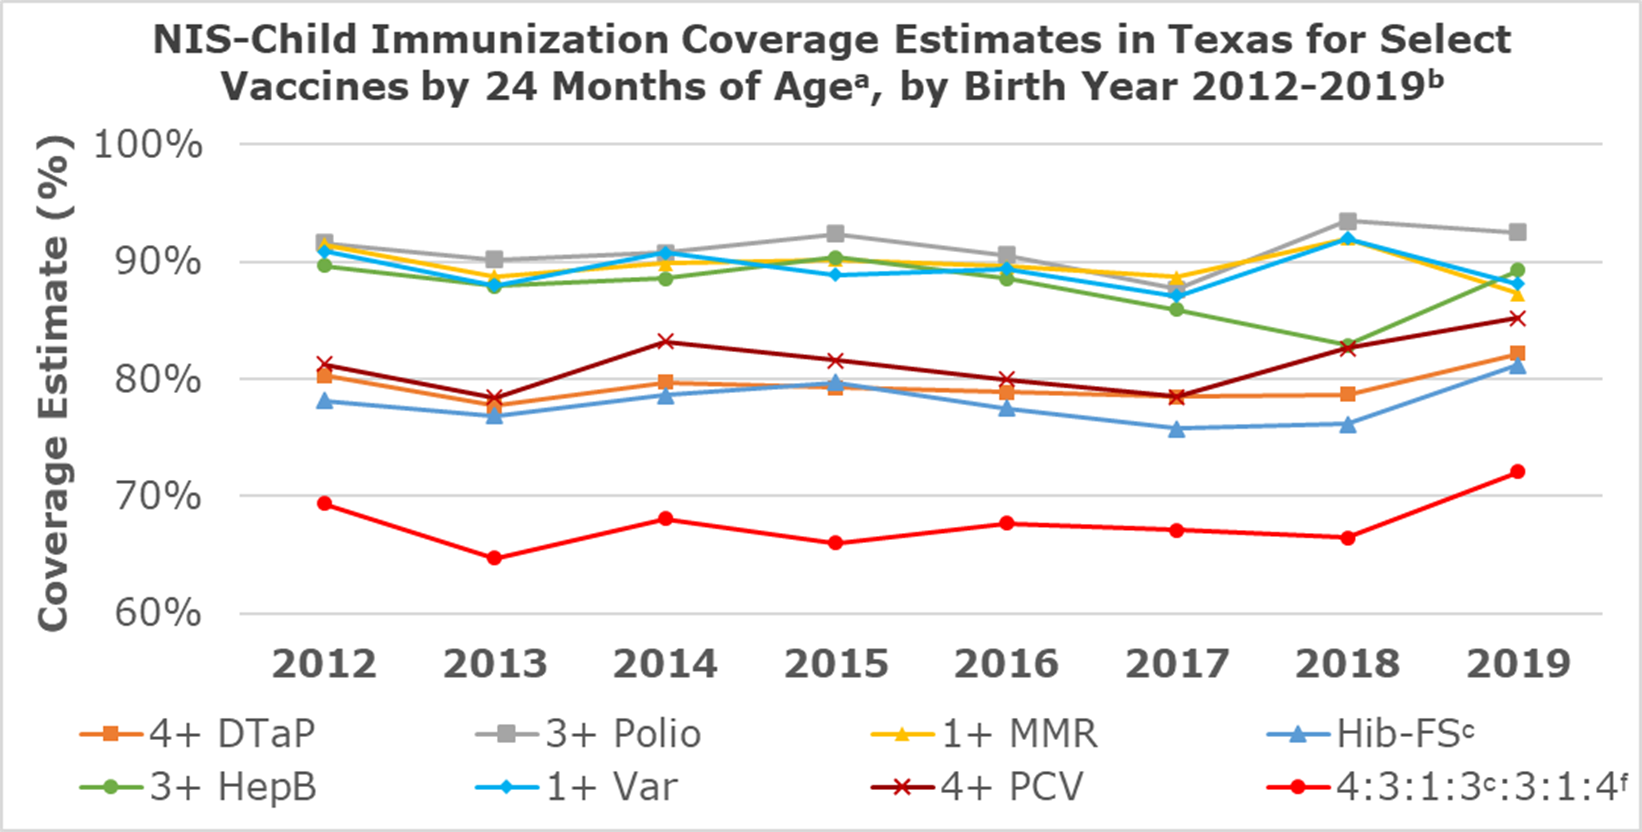 NIS-Child Immunization Coverage Estimates in Texas for Select Vaccines by 24 Months of Age, by Birth Year 2012-2019